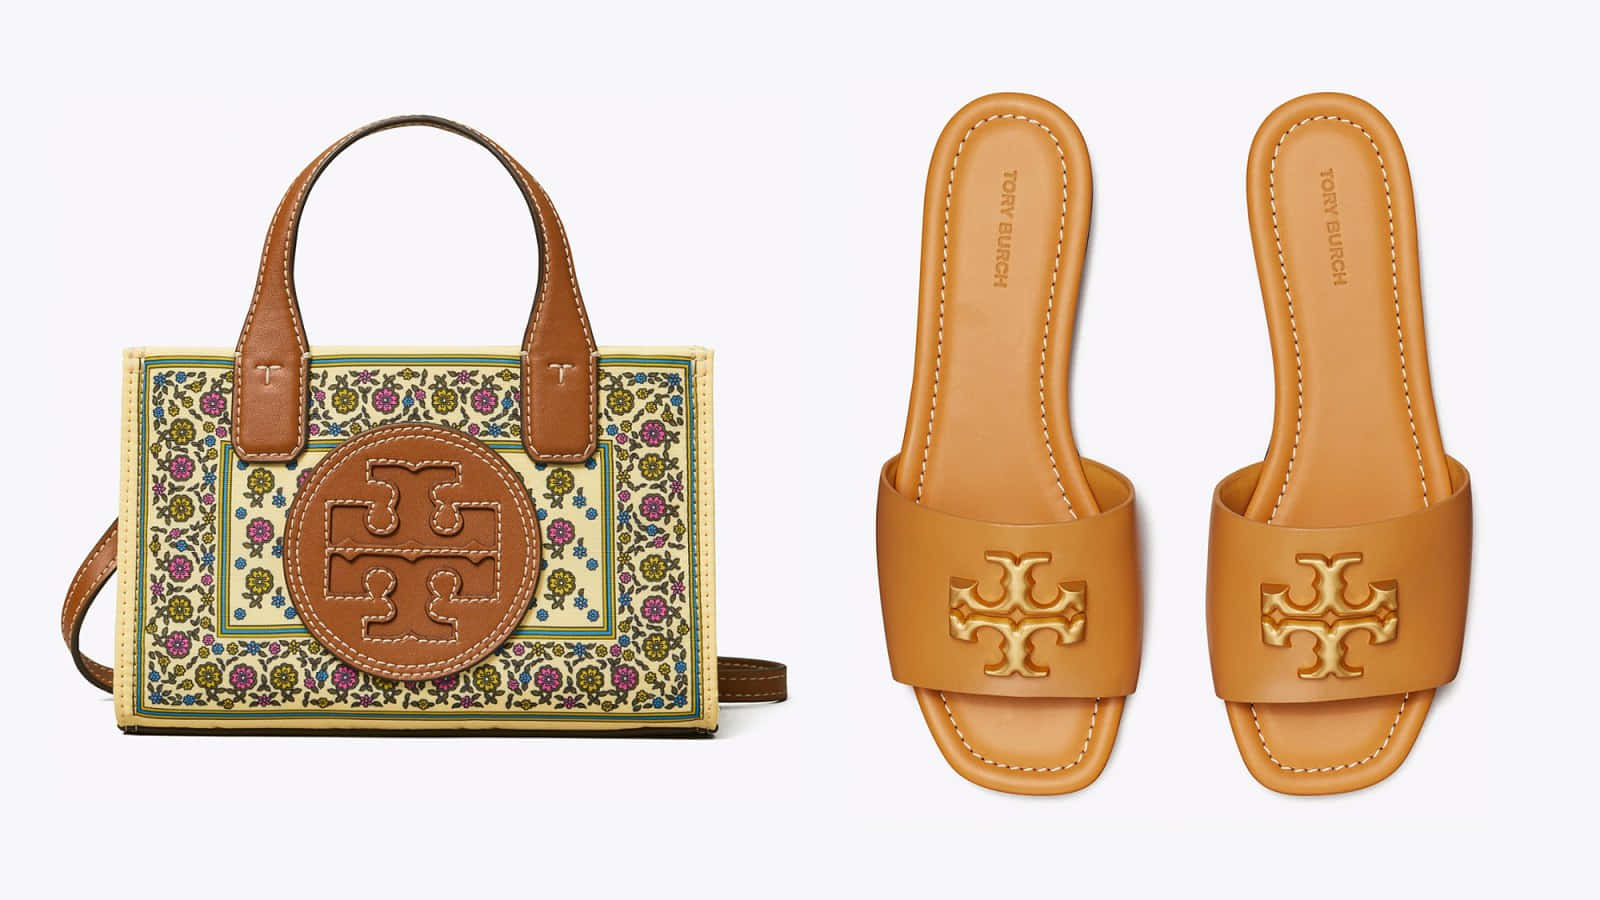 Experience Timeless Style with Tory Burch